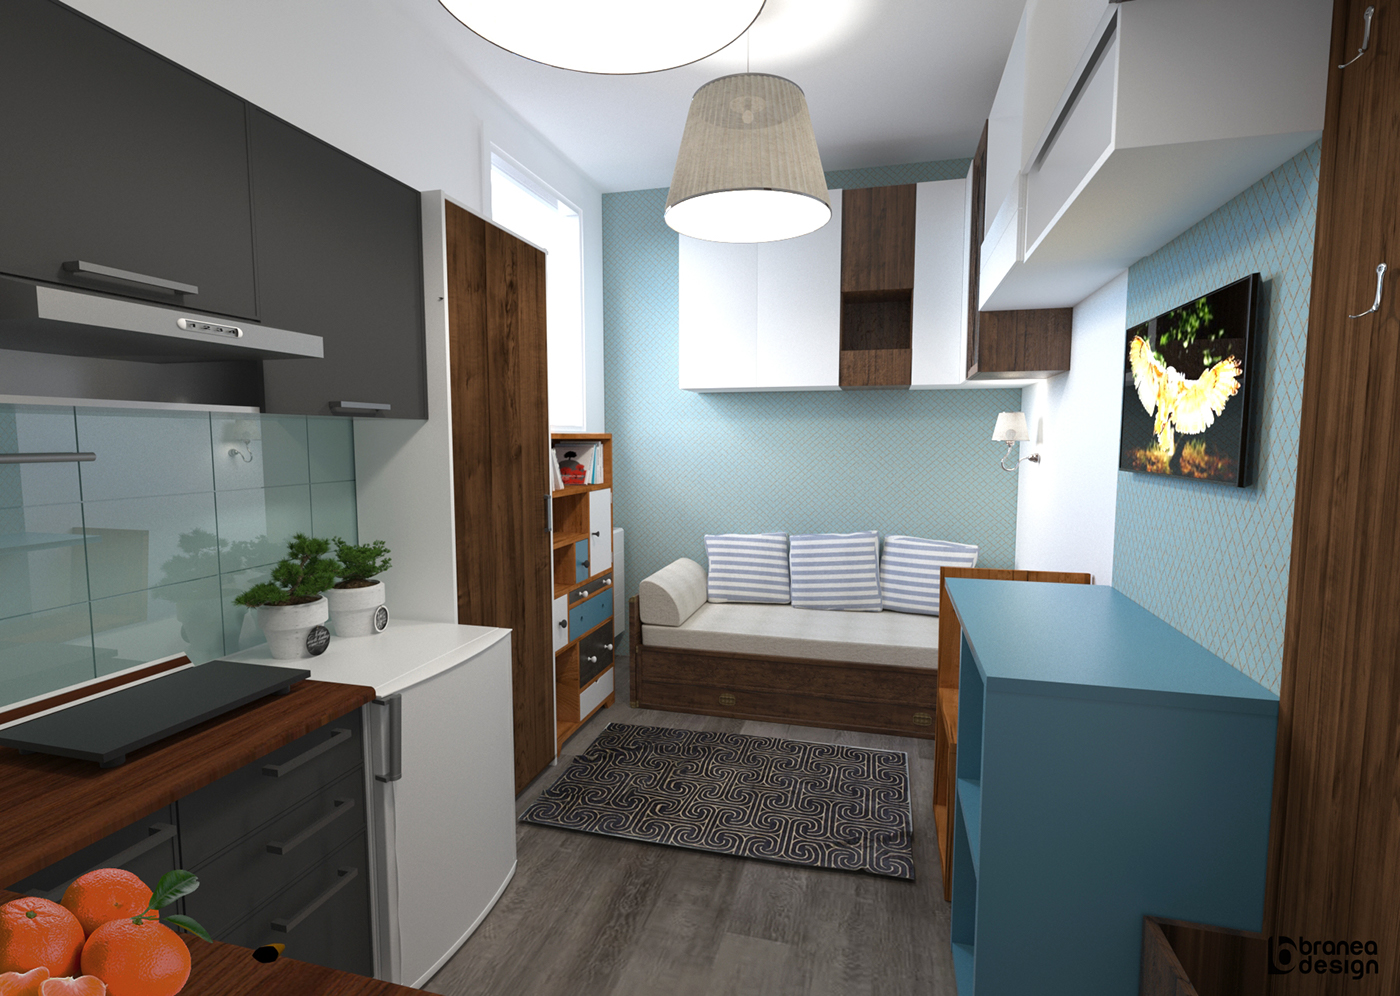 Small, low budget, one person studio apartment on Behance